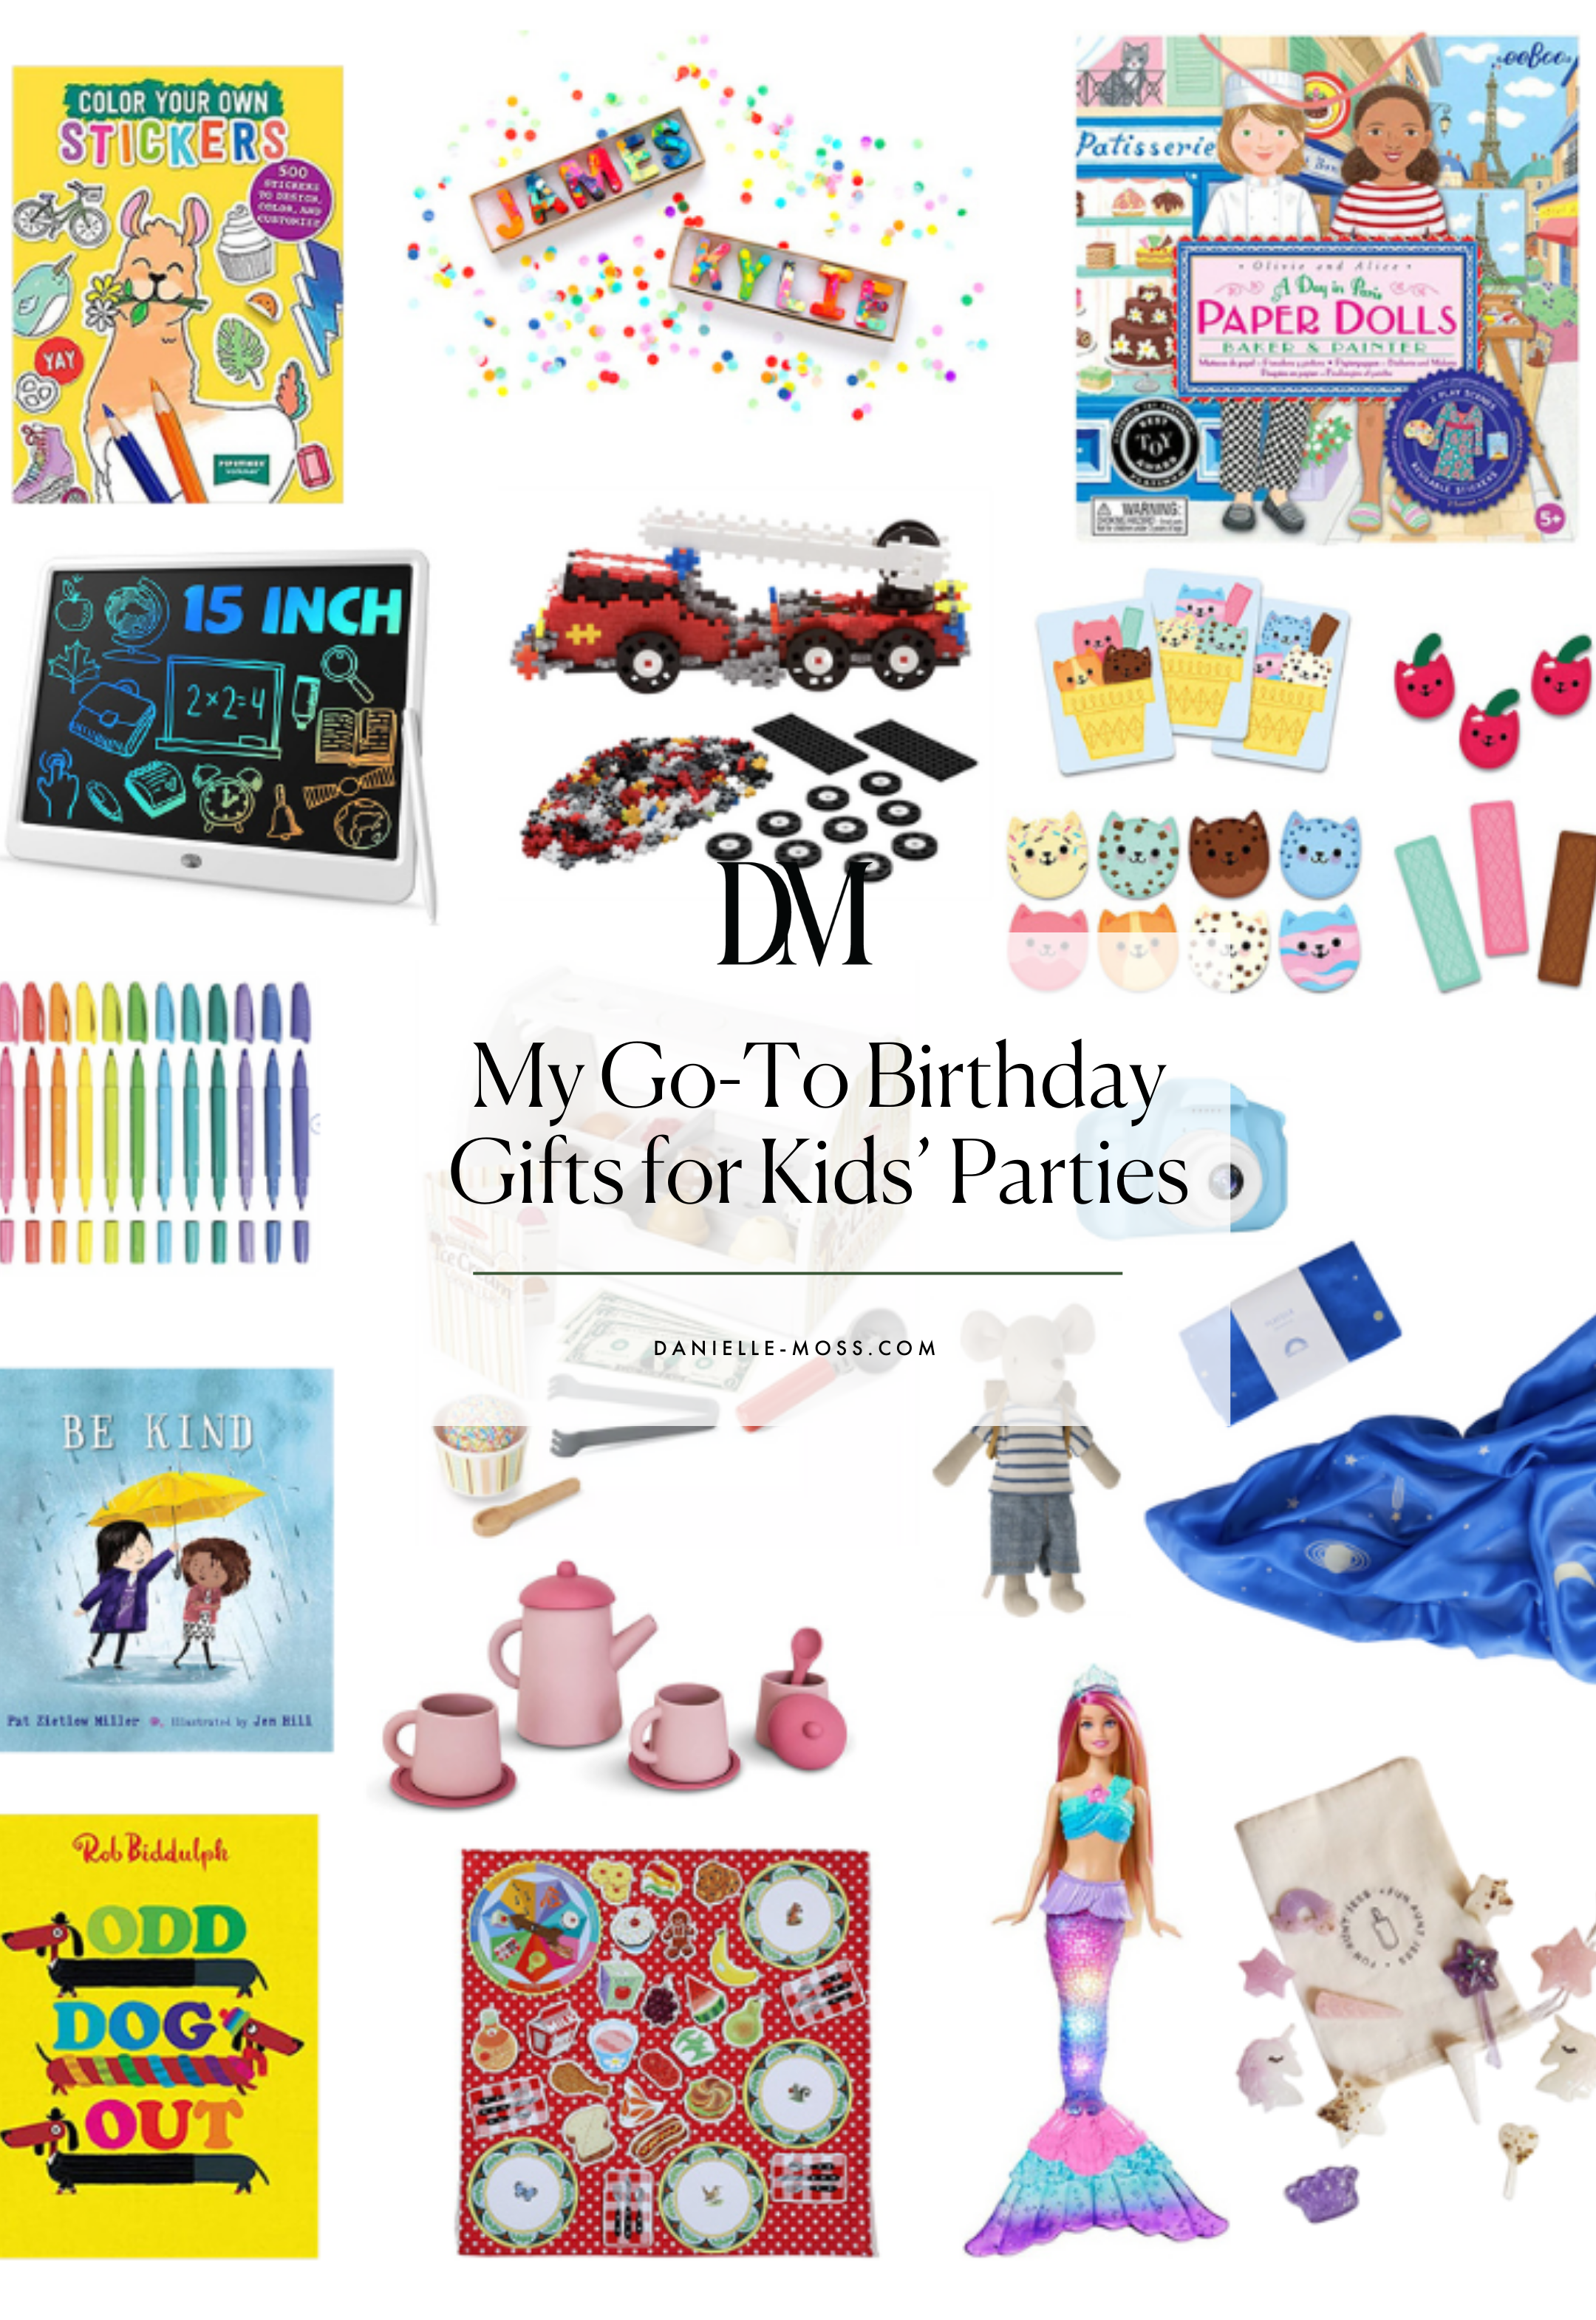 The Birthday Gifts I Stock Up on For Kids' Parties